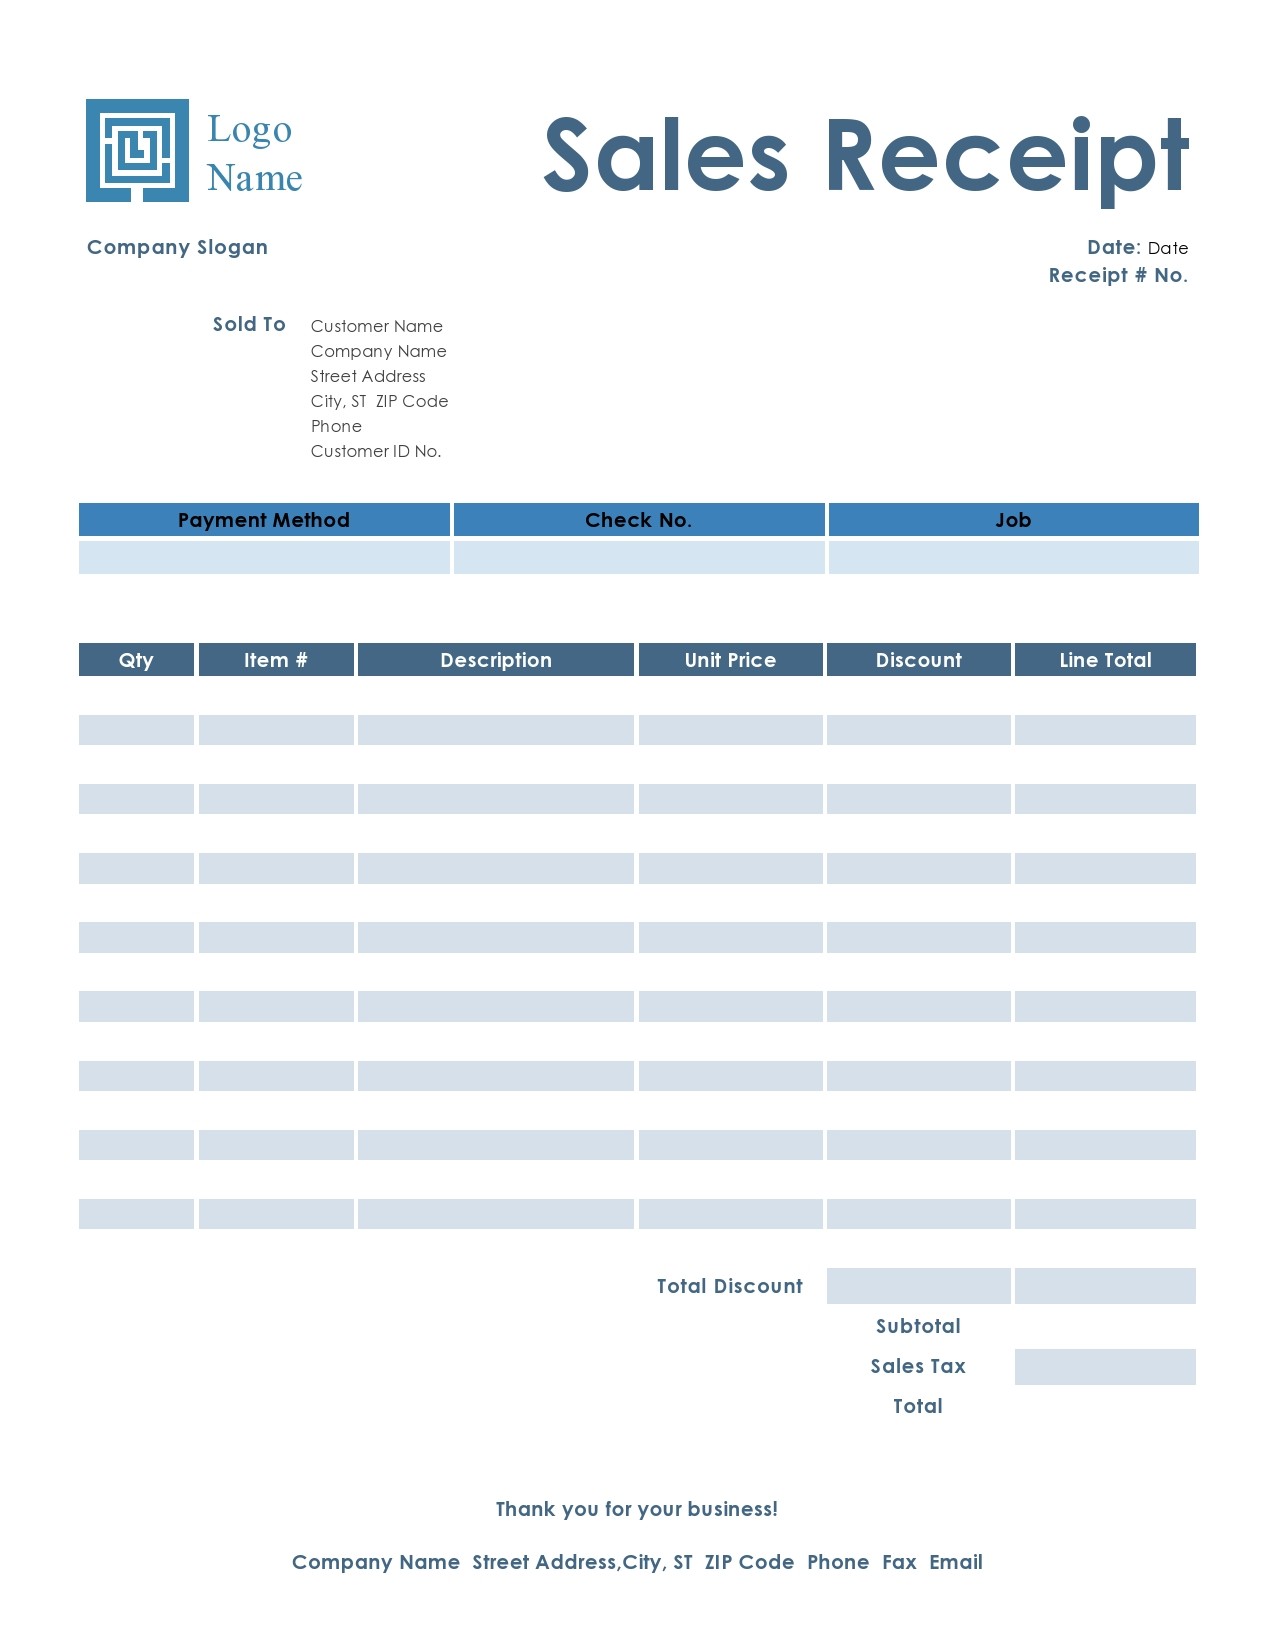 sales-receipt-template-in-word-and-pdf-formats